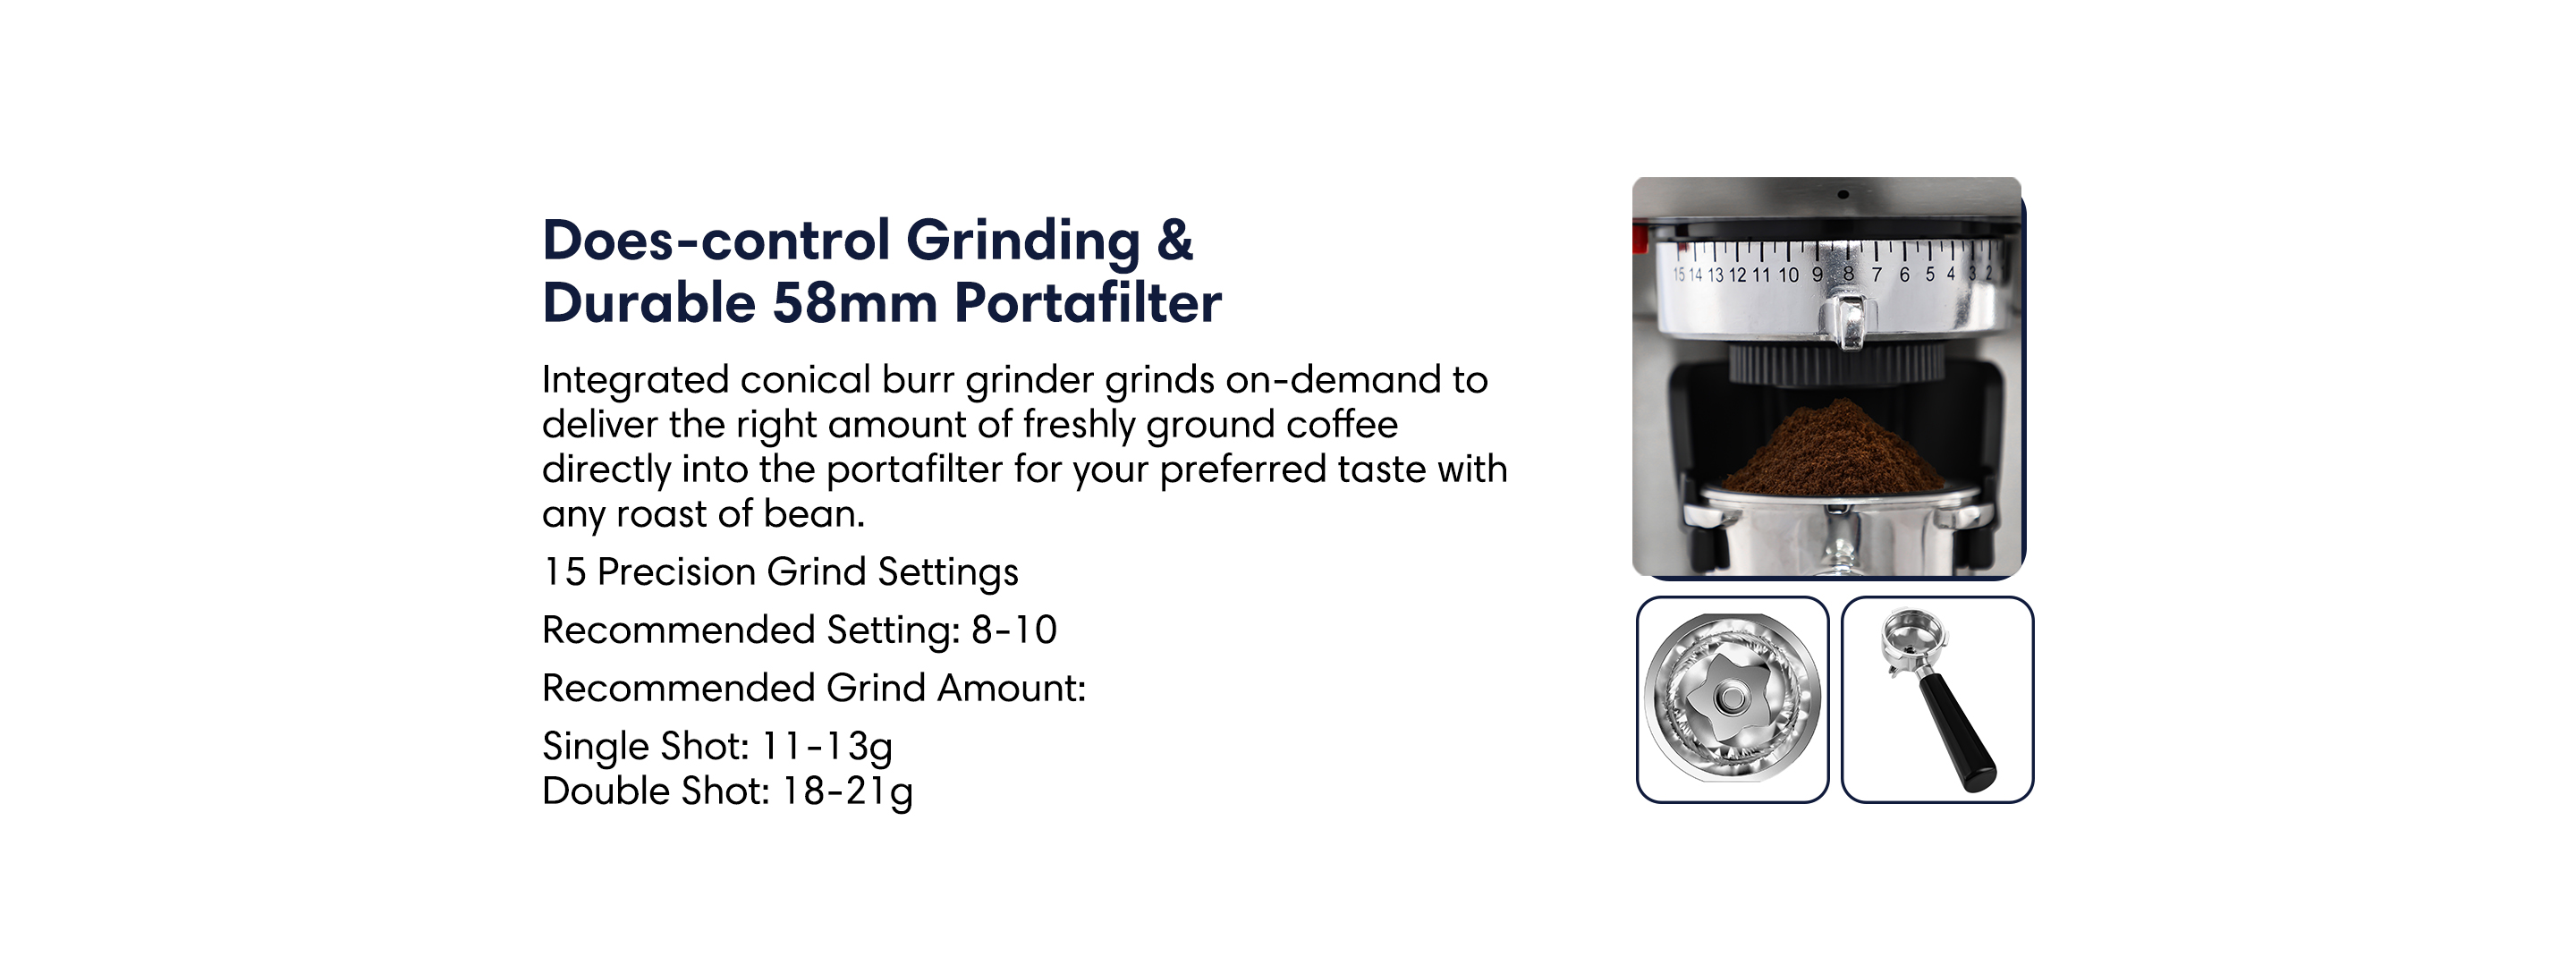 Dose-contril grinding and durable 58mm stainless steel portafilter. Integrated conical burr grinder grinds on-demand to deliver the right amount of freshly ground coffee directly into the portafilter for your preferred taste with any roast of bean.